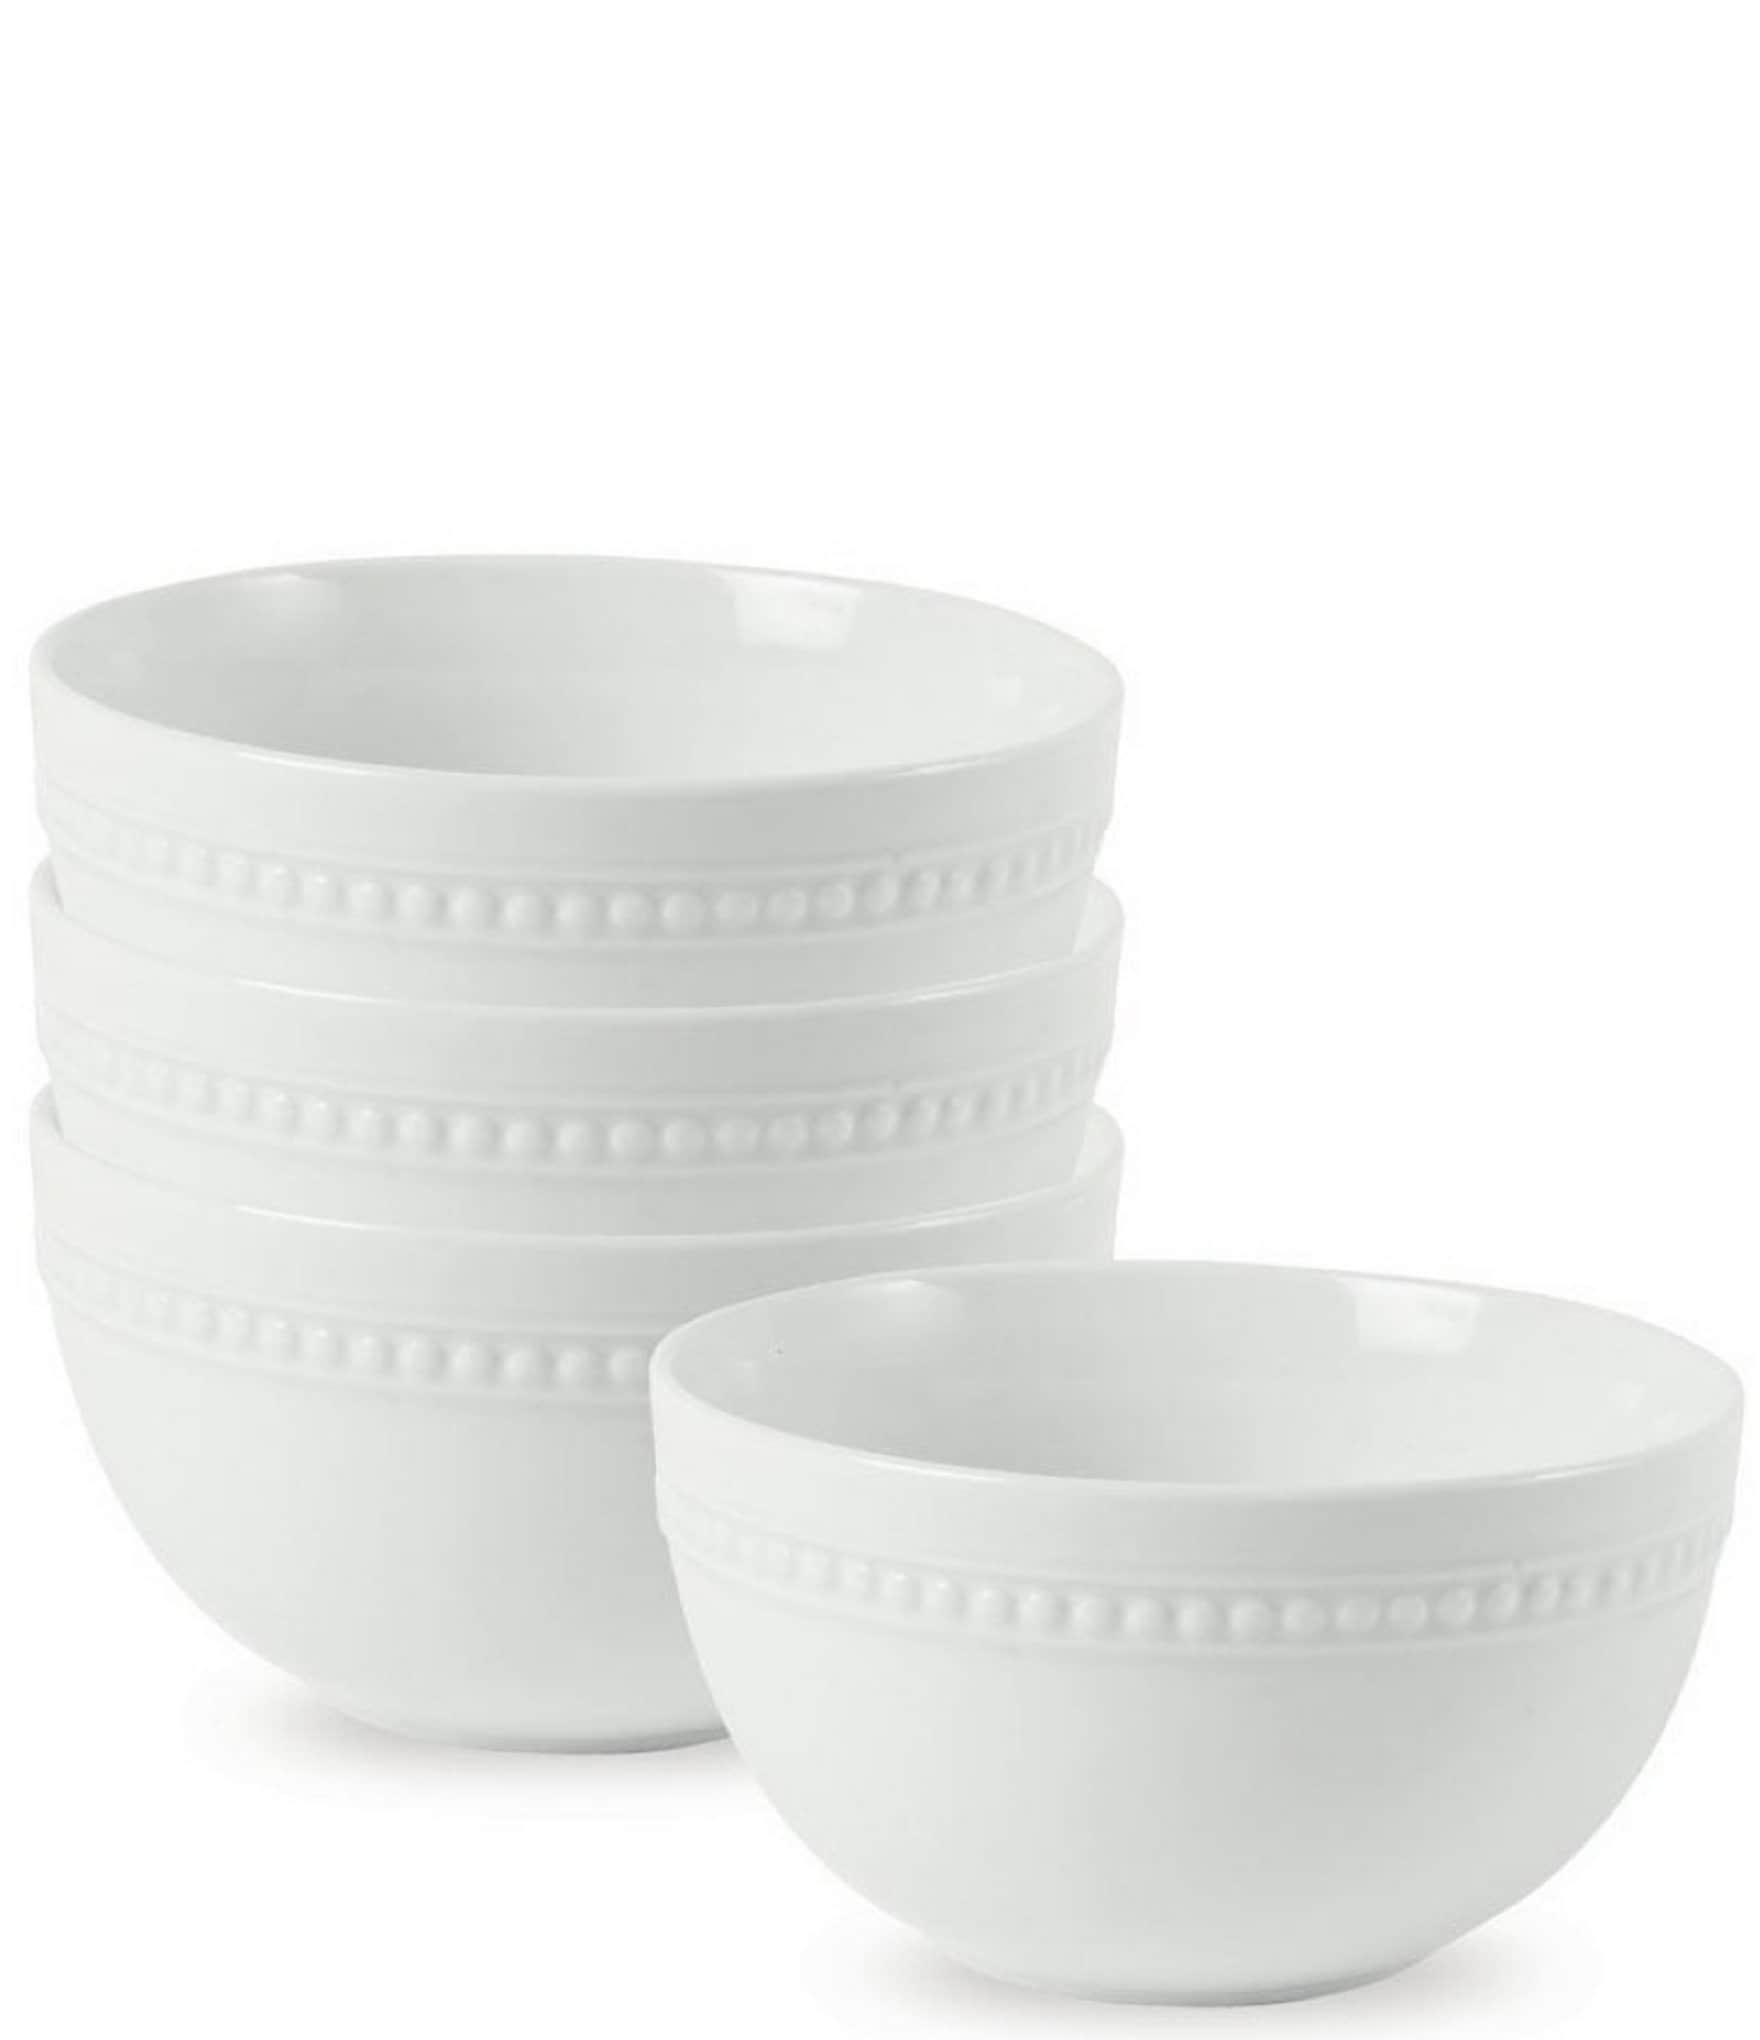 Everyday White by Fitz and Floyd Set of 4 Handled Soup Chili Bowls, 20 Ounces, White